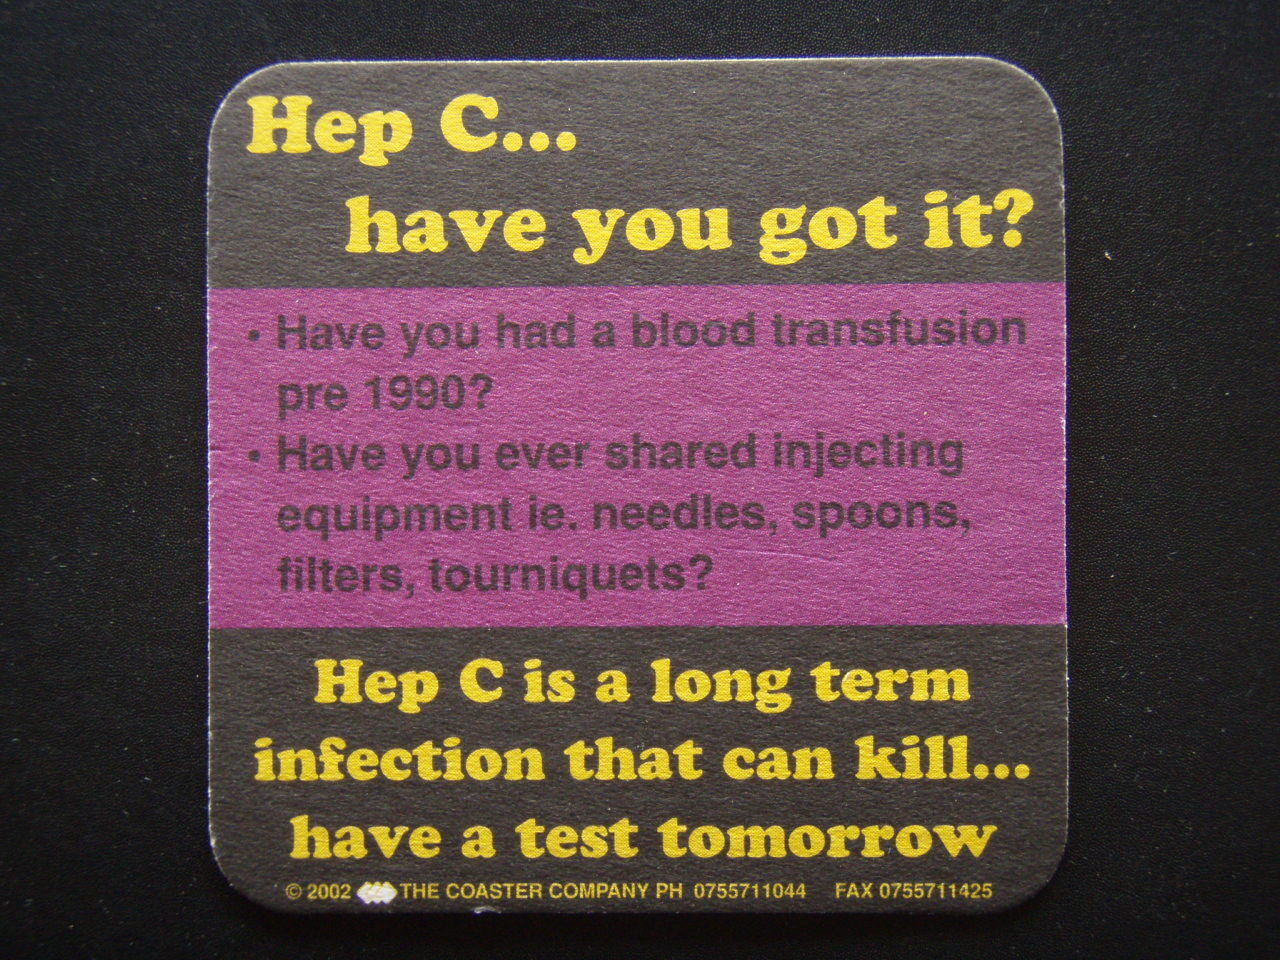 HEP C... HAVE YOU GOT IT? IS A LONG TERM INFECTION THAT CAN KILL... COASTER